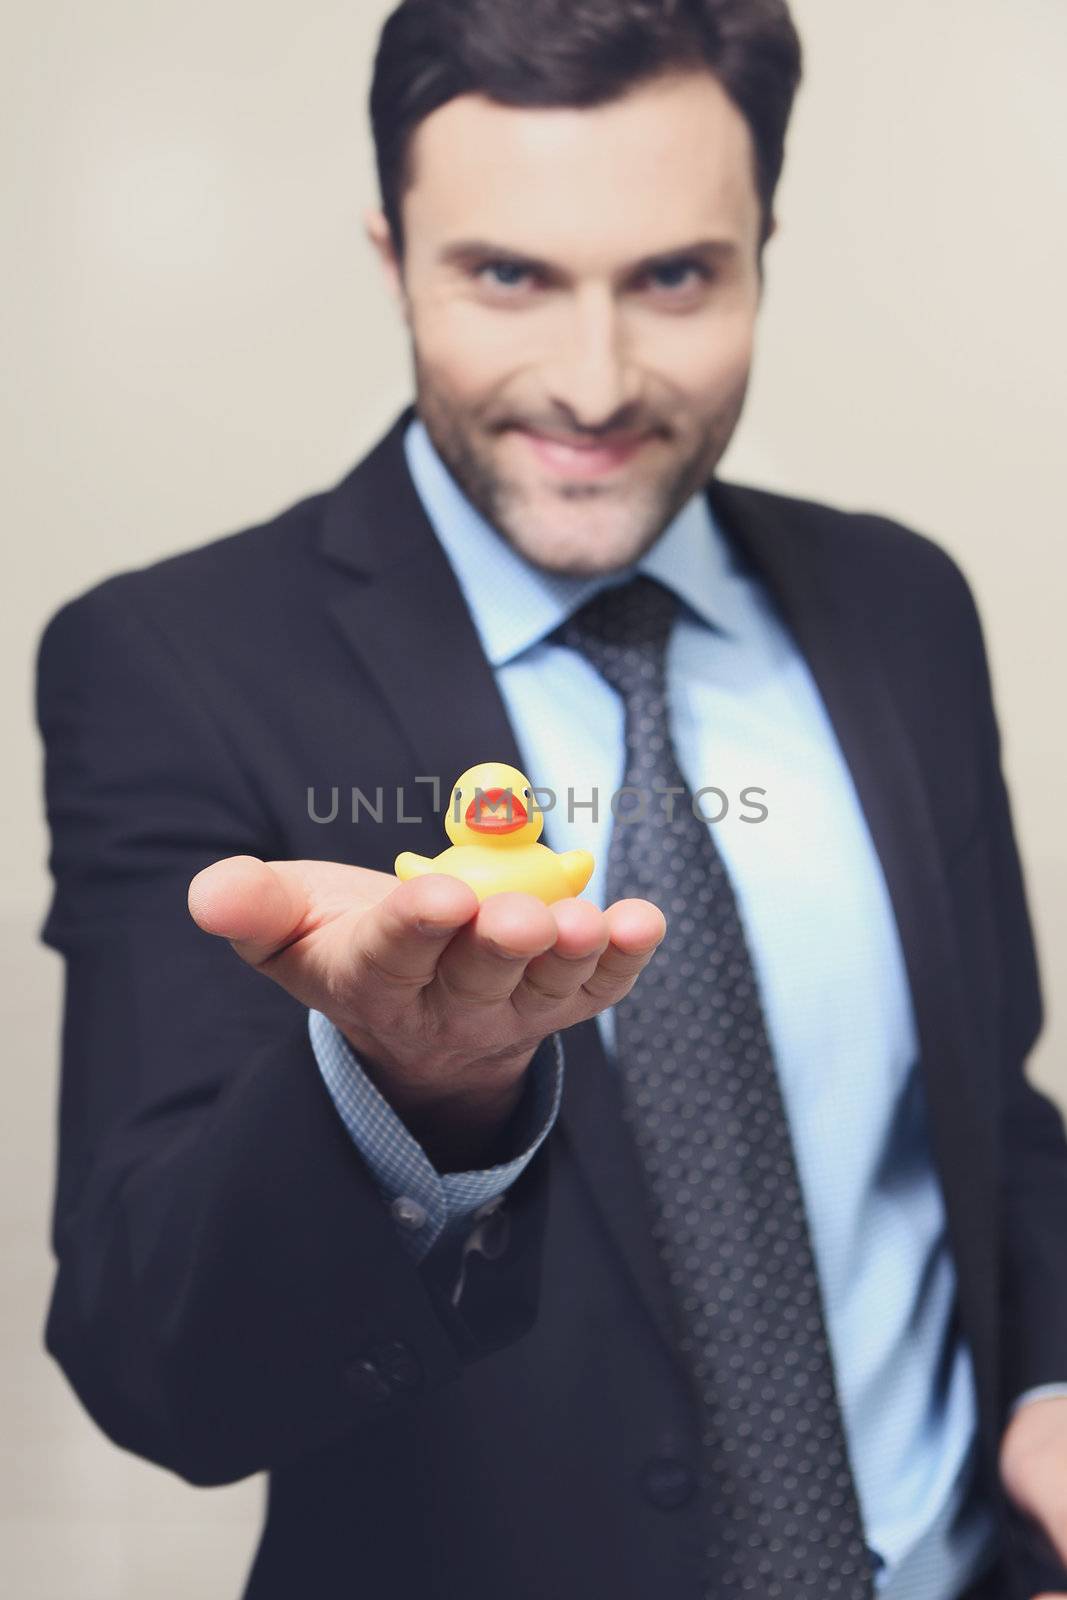 A young man with a yellow rubber duck